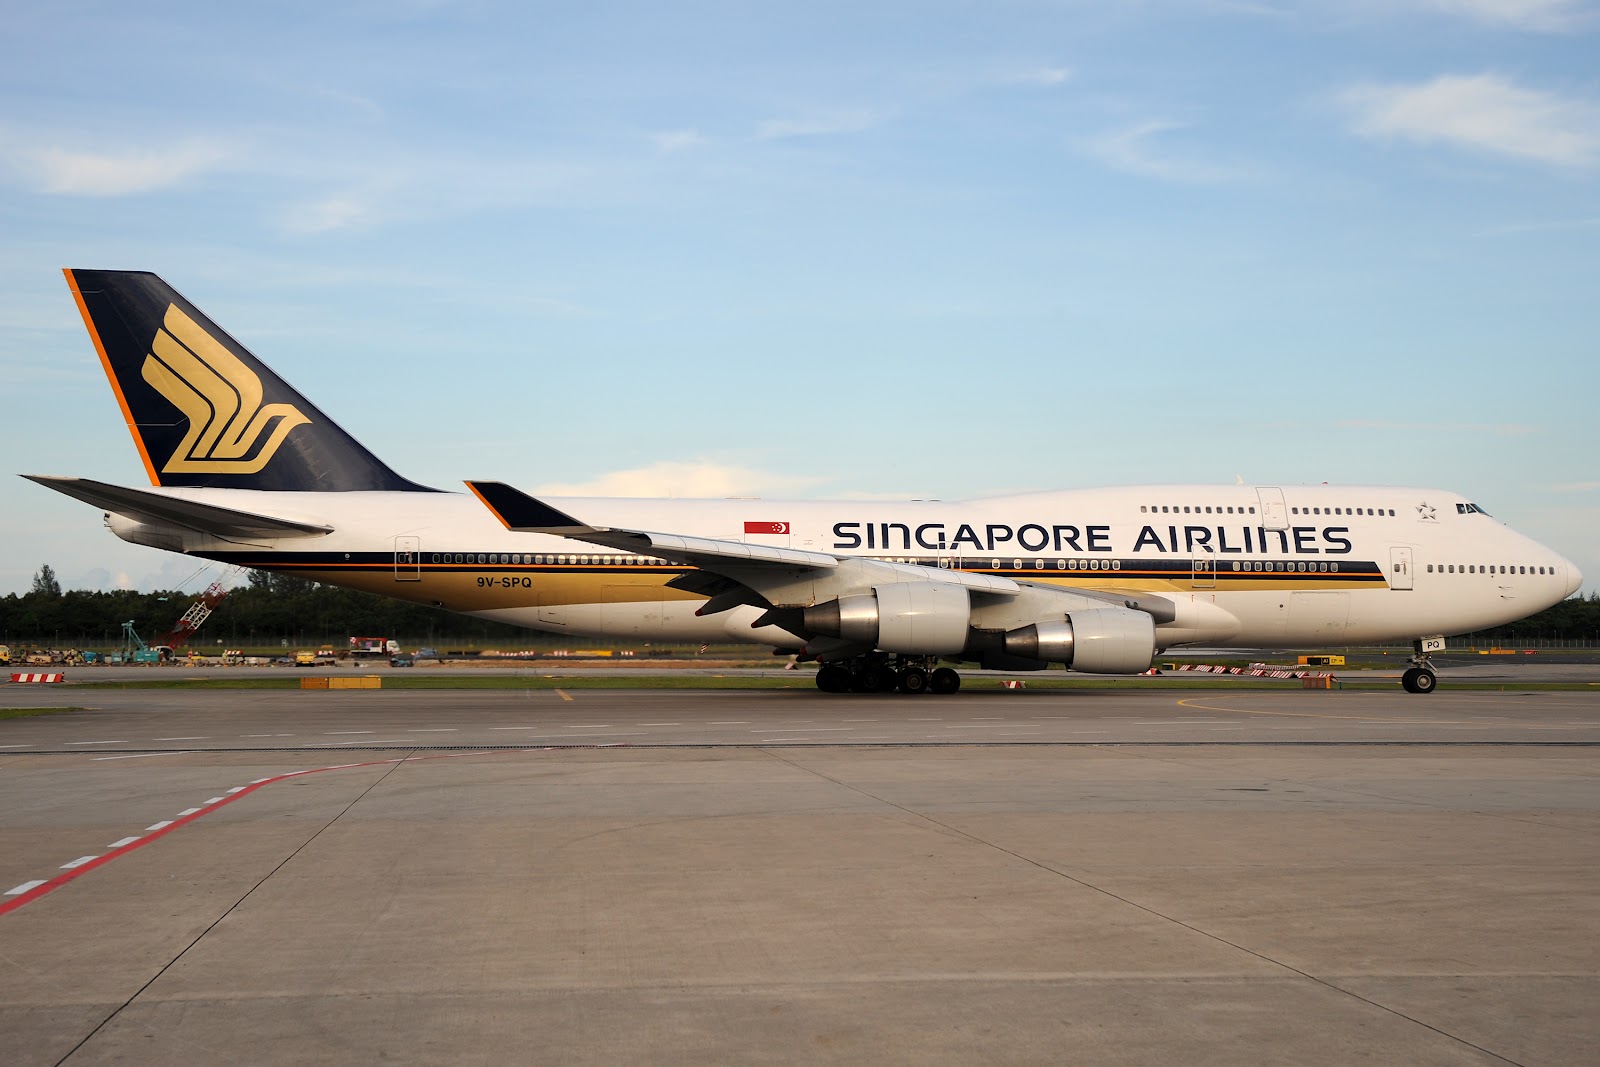 Singapore Airlines With Boeing 9v Spq Aircraft Wallpaper